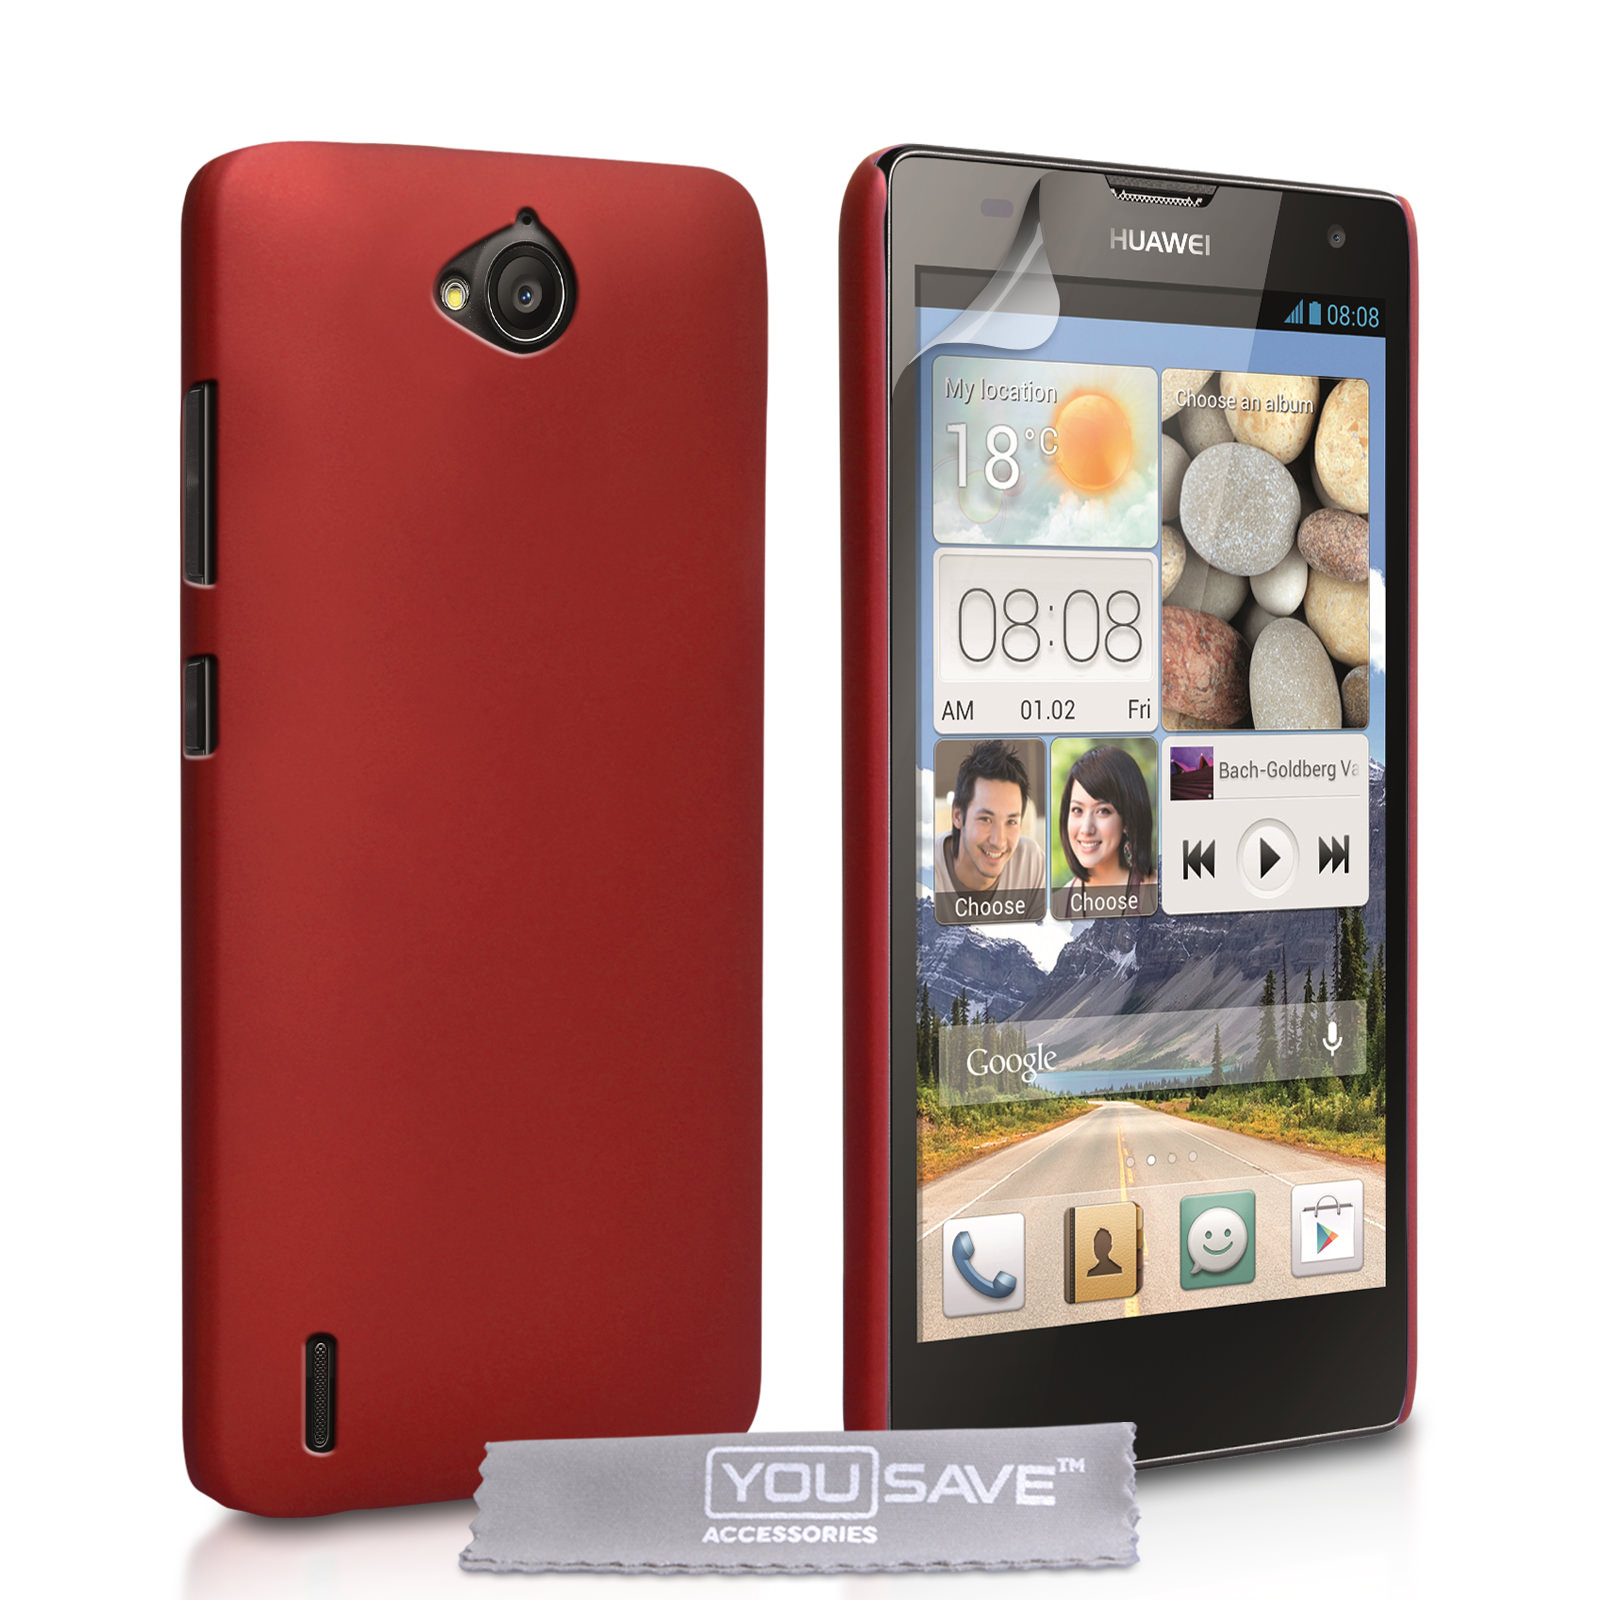 YouSave Accessories Huawei Ascend G740 Hard Hybrid Case - Red